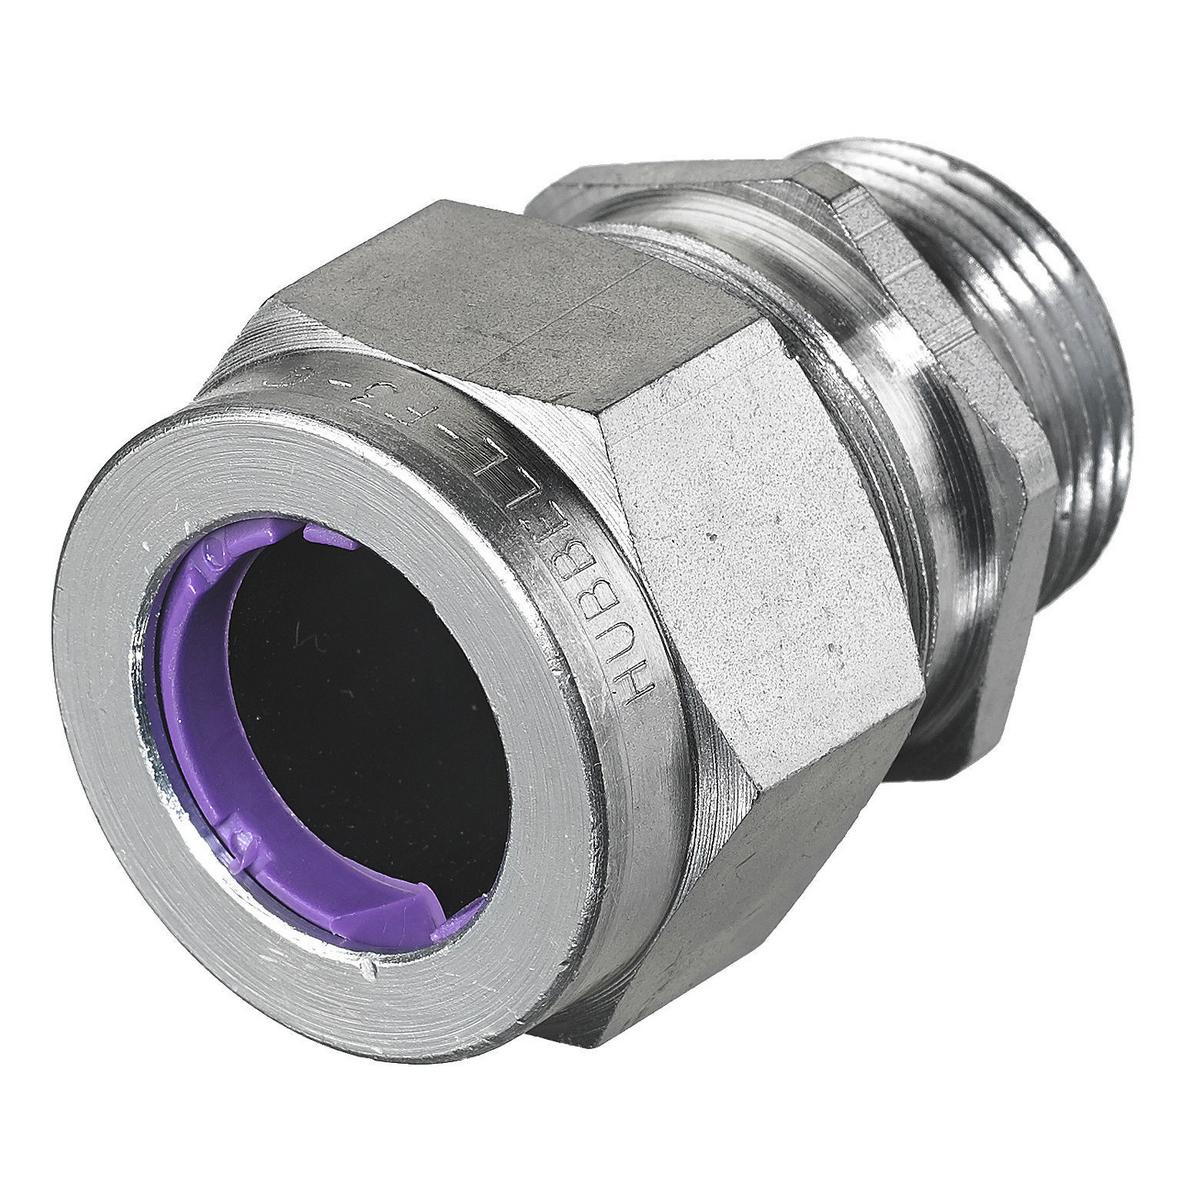 Hubbell SHC1038ZP Kellems Wire Management, Cord Connectors, Straight Male, .75-.88", 3/4", Steel  ; Zinc-plated cord connector provides the strength and corrosion resistance ; Standard Product